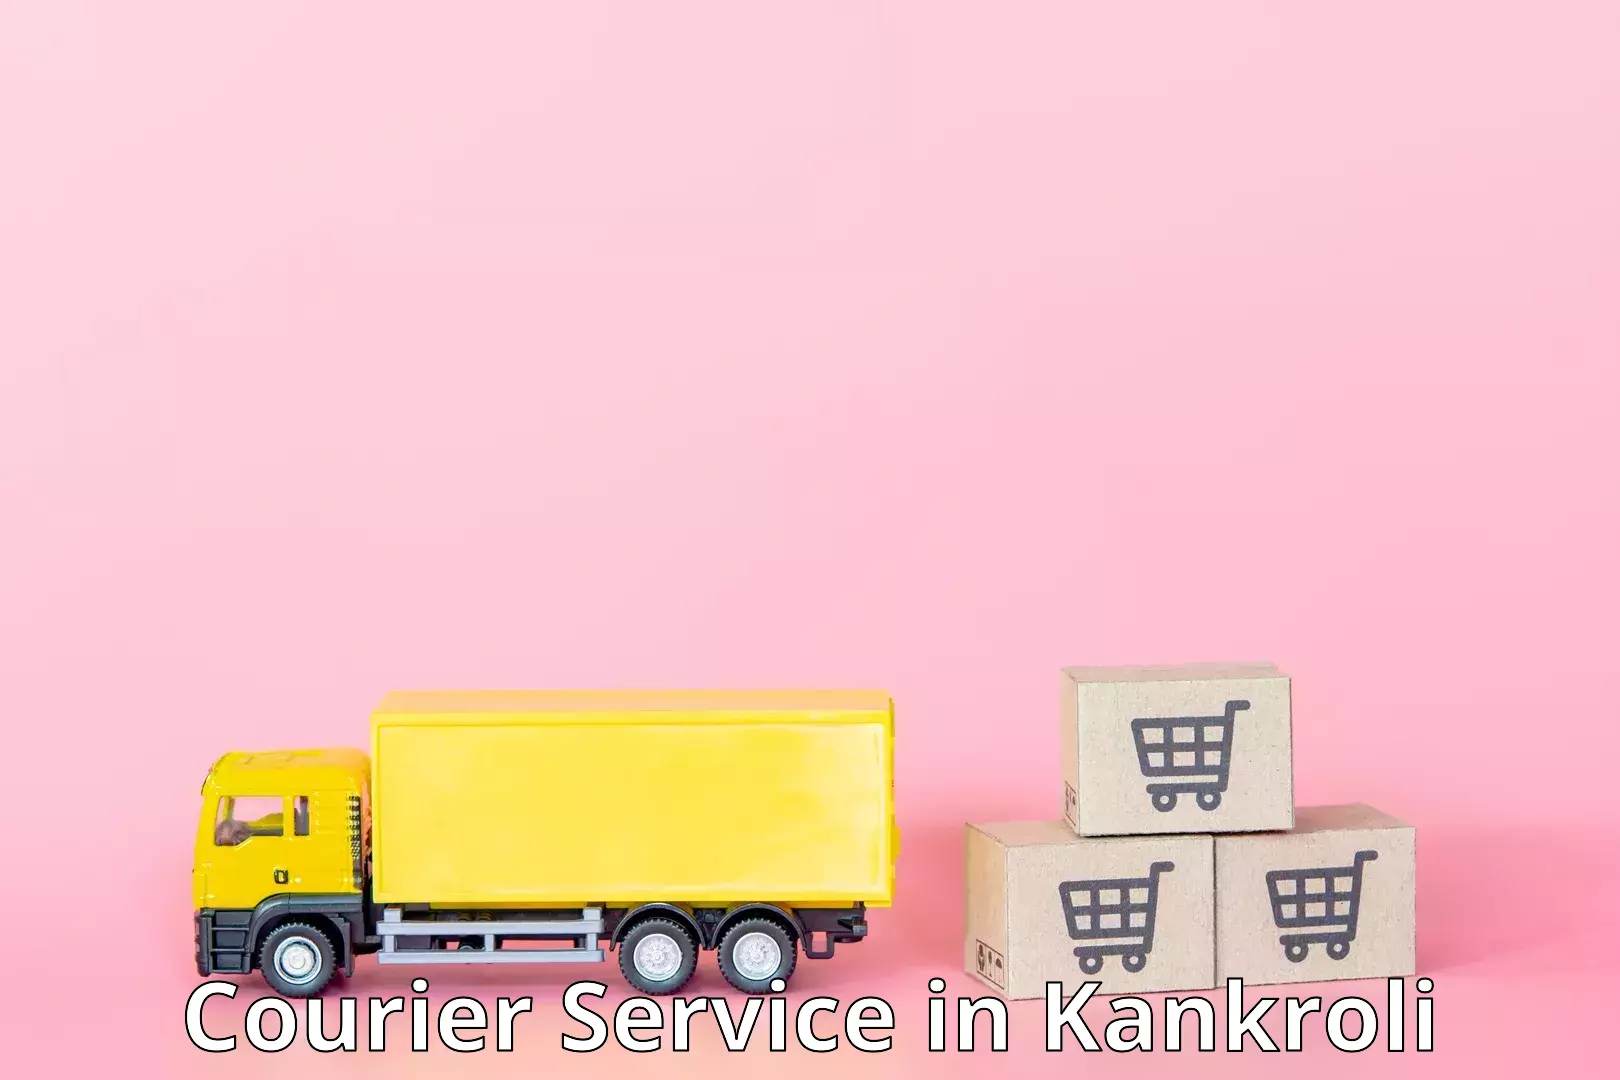 End-to-end delivery in Kankroli